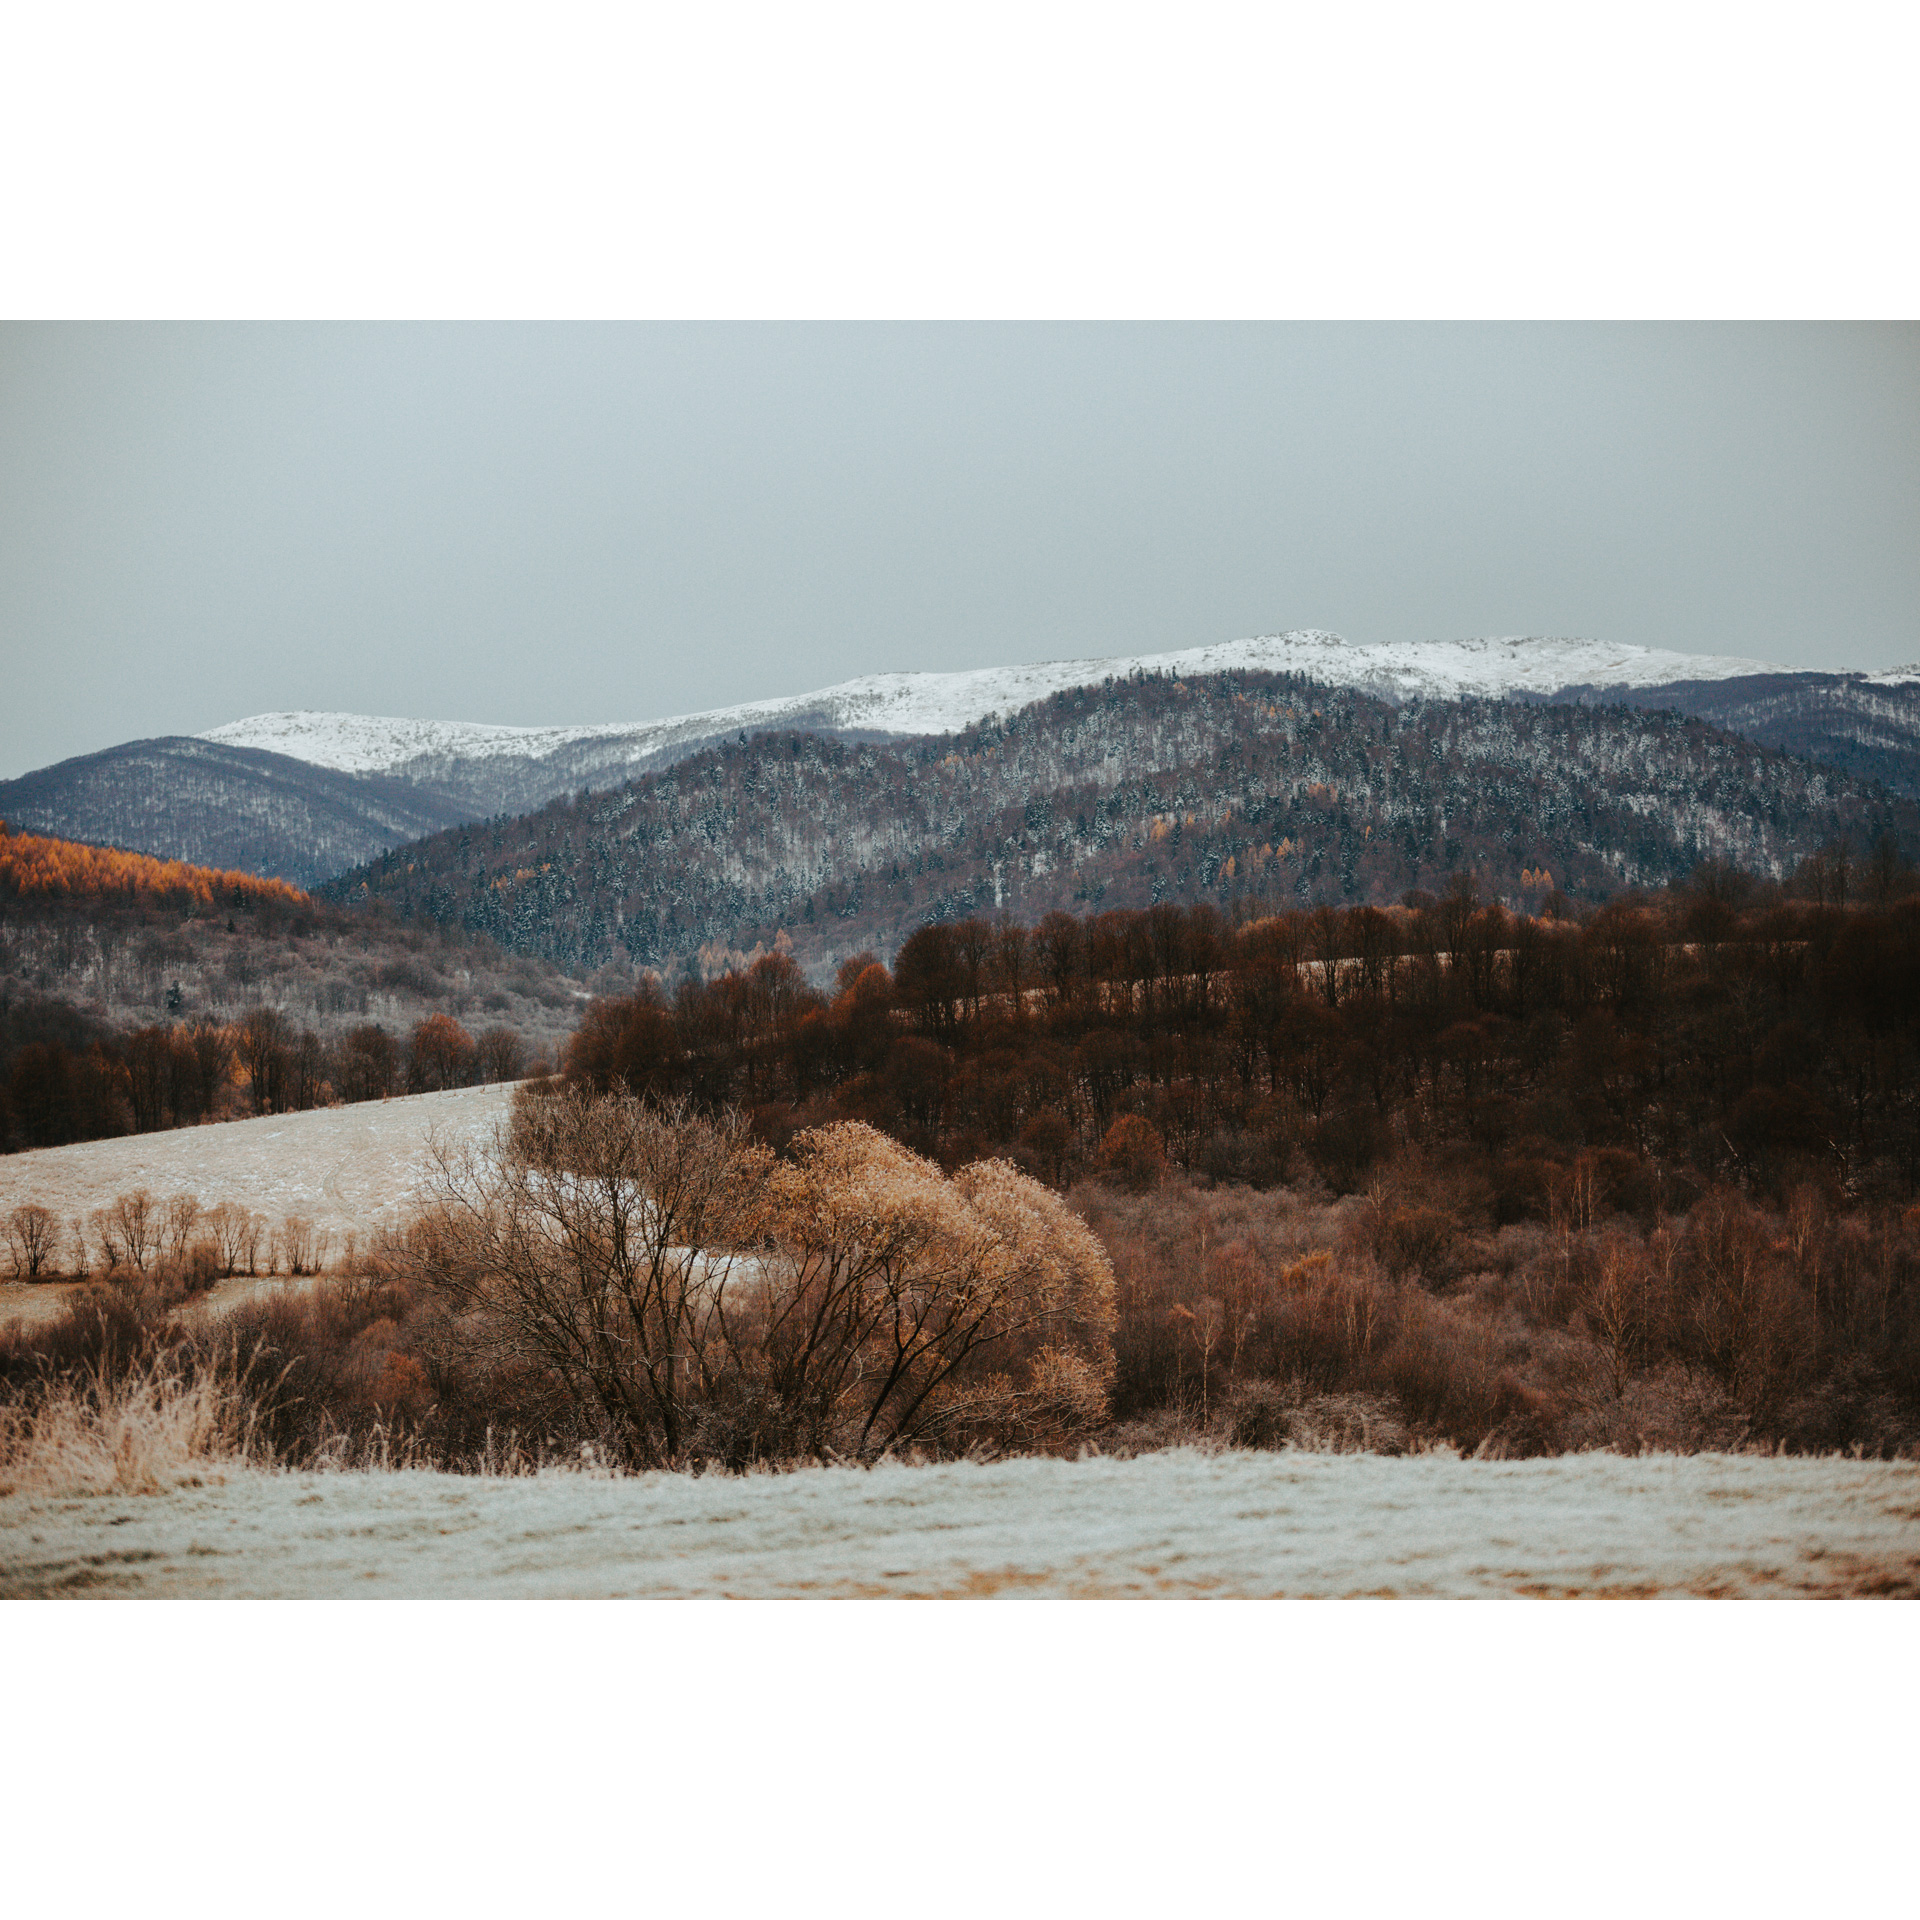 Forested and frosted hills with a panorama of mountain ranges in the background